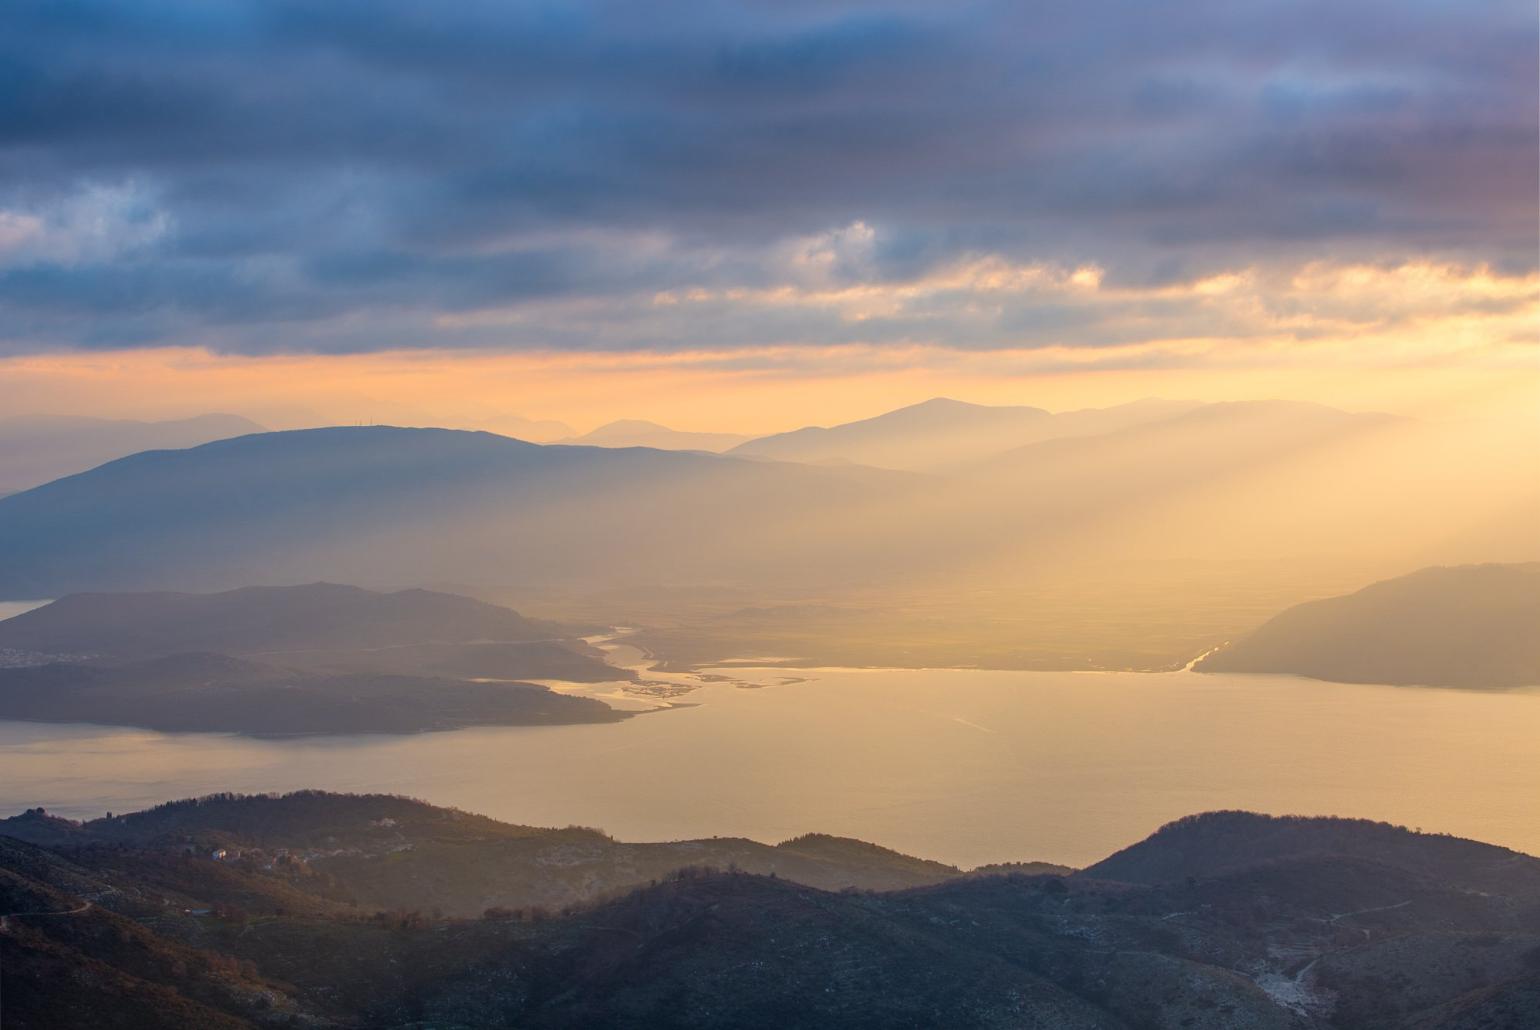 Sunrise from Mount Pantokrator - the highest point in Corfu